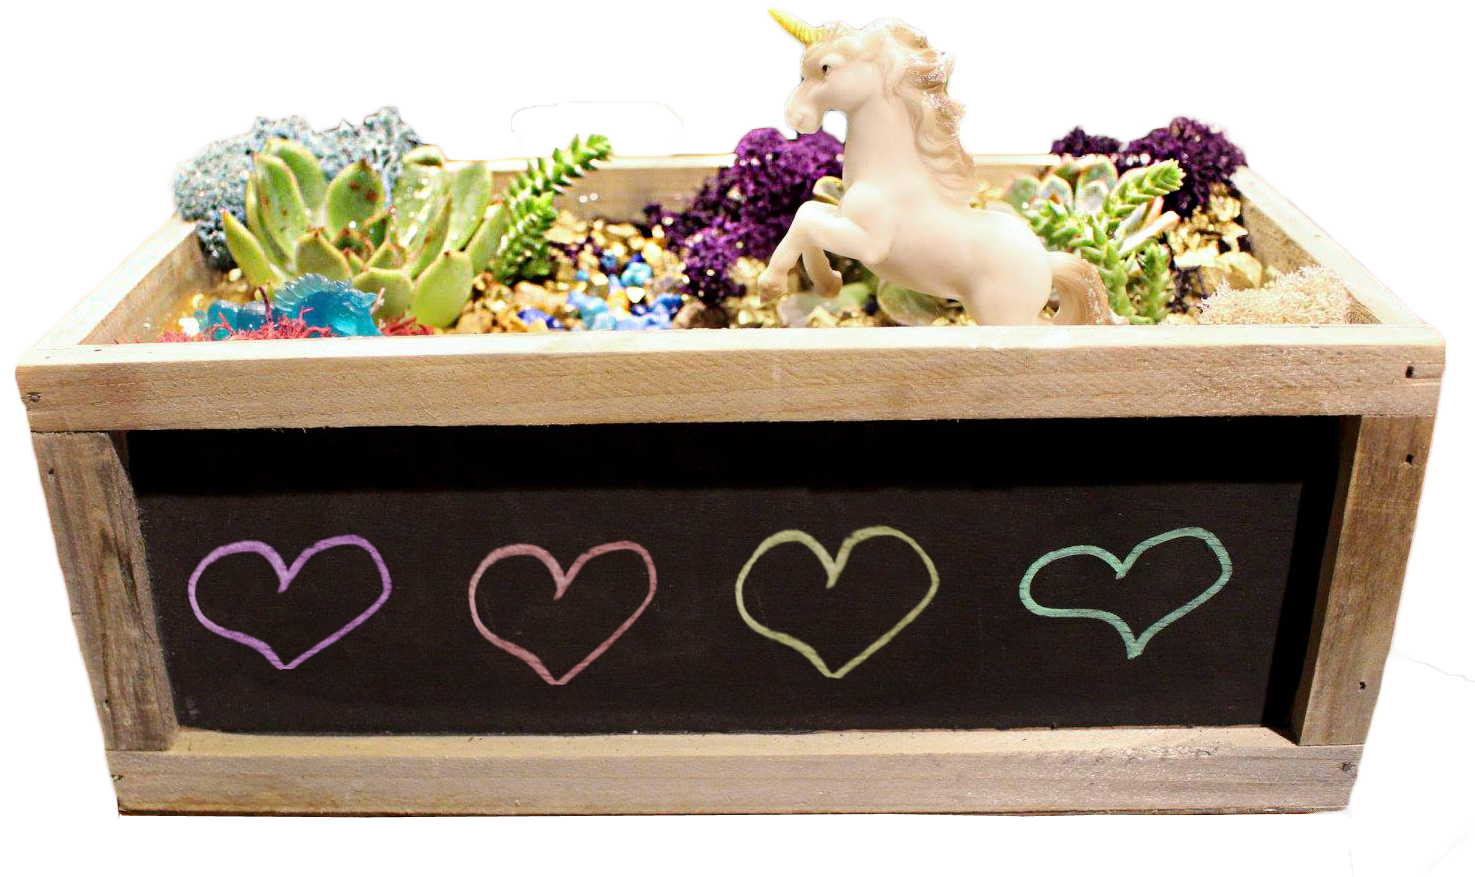 A Must Love Unicorns Chalkboard Container plant nite project by Yaymaker